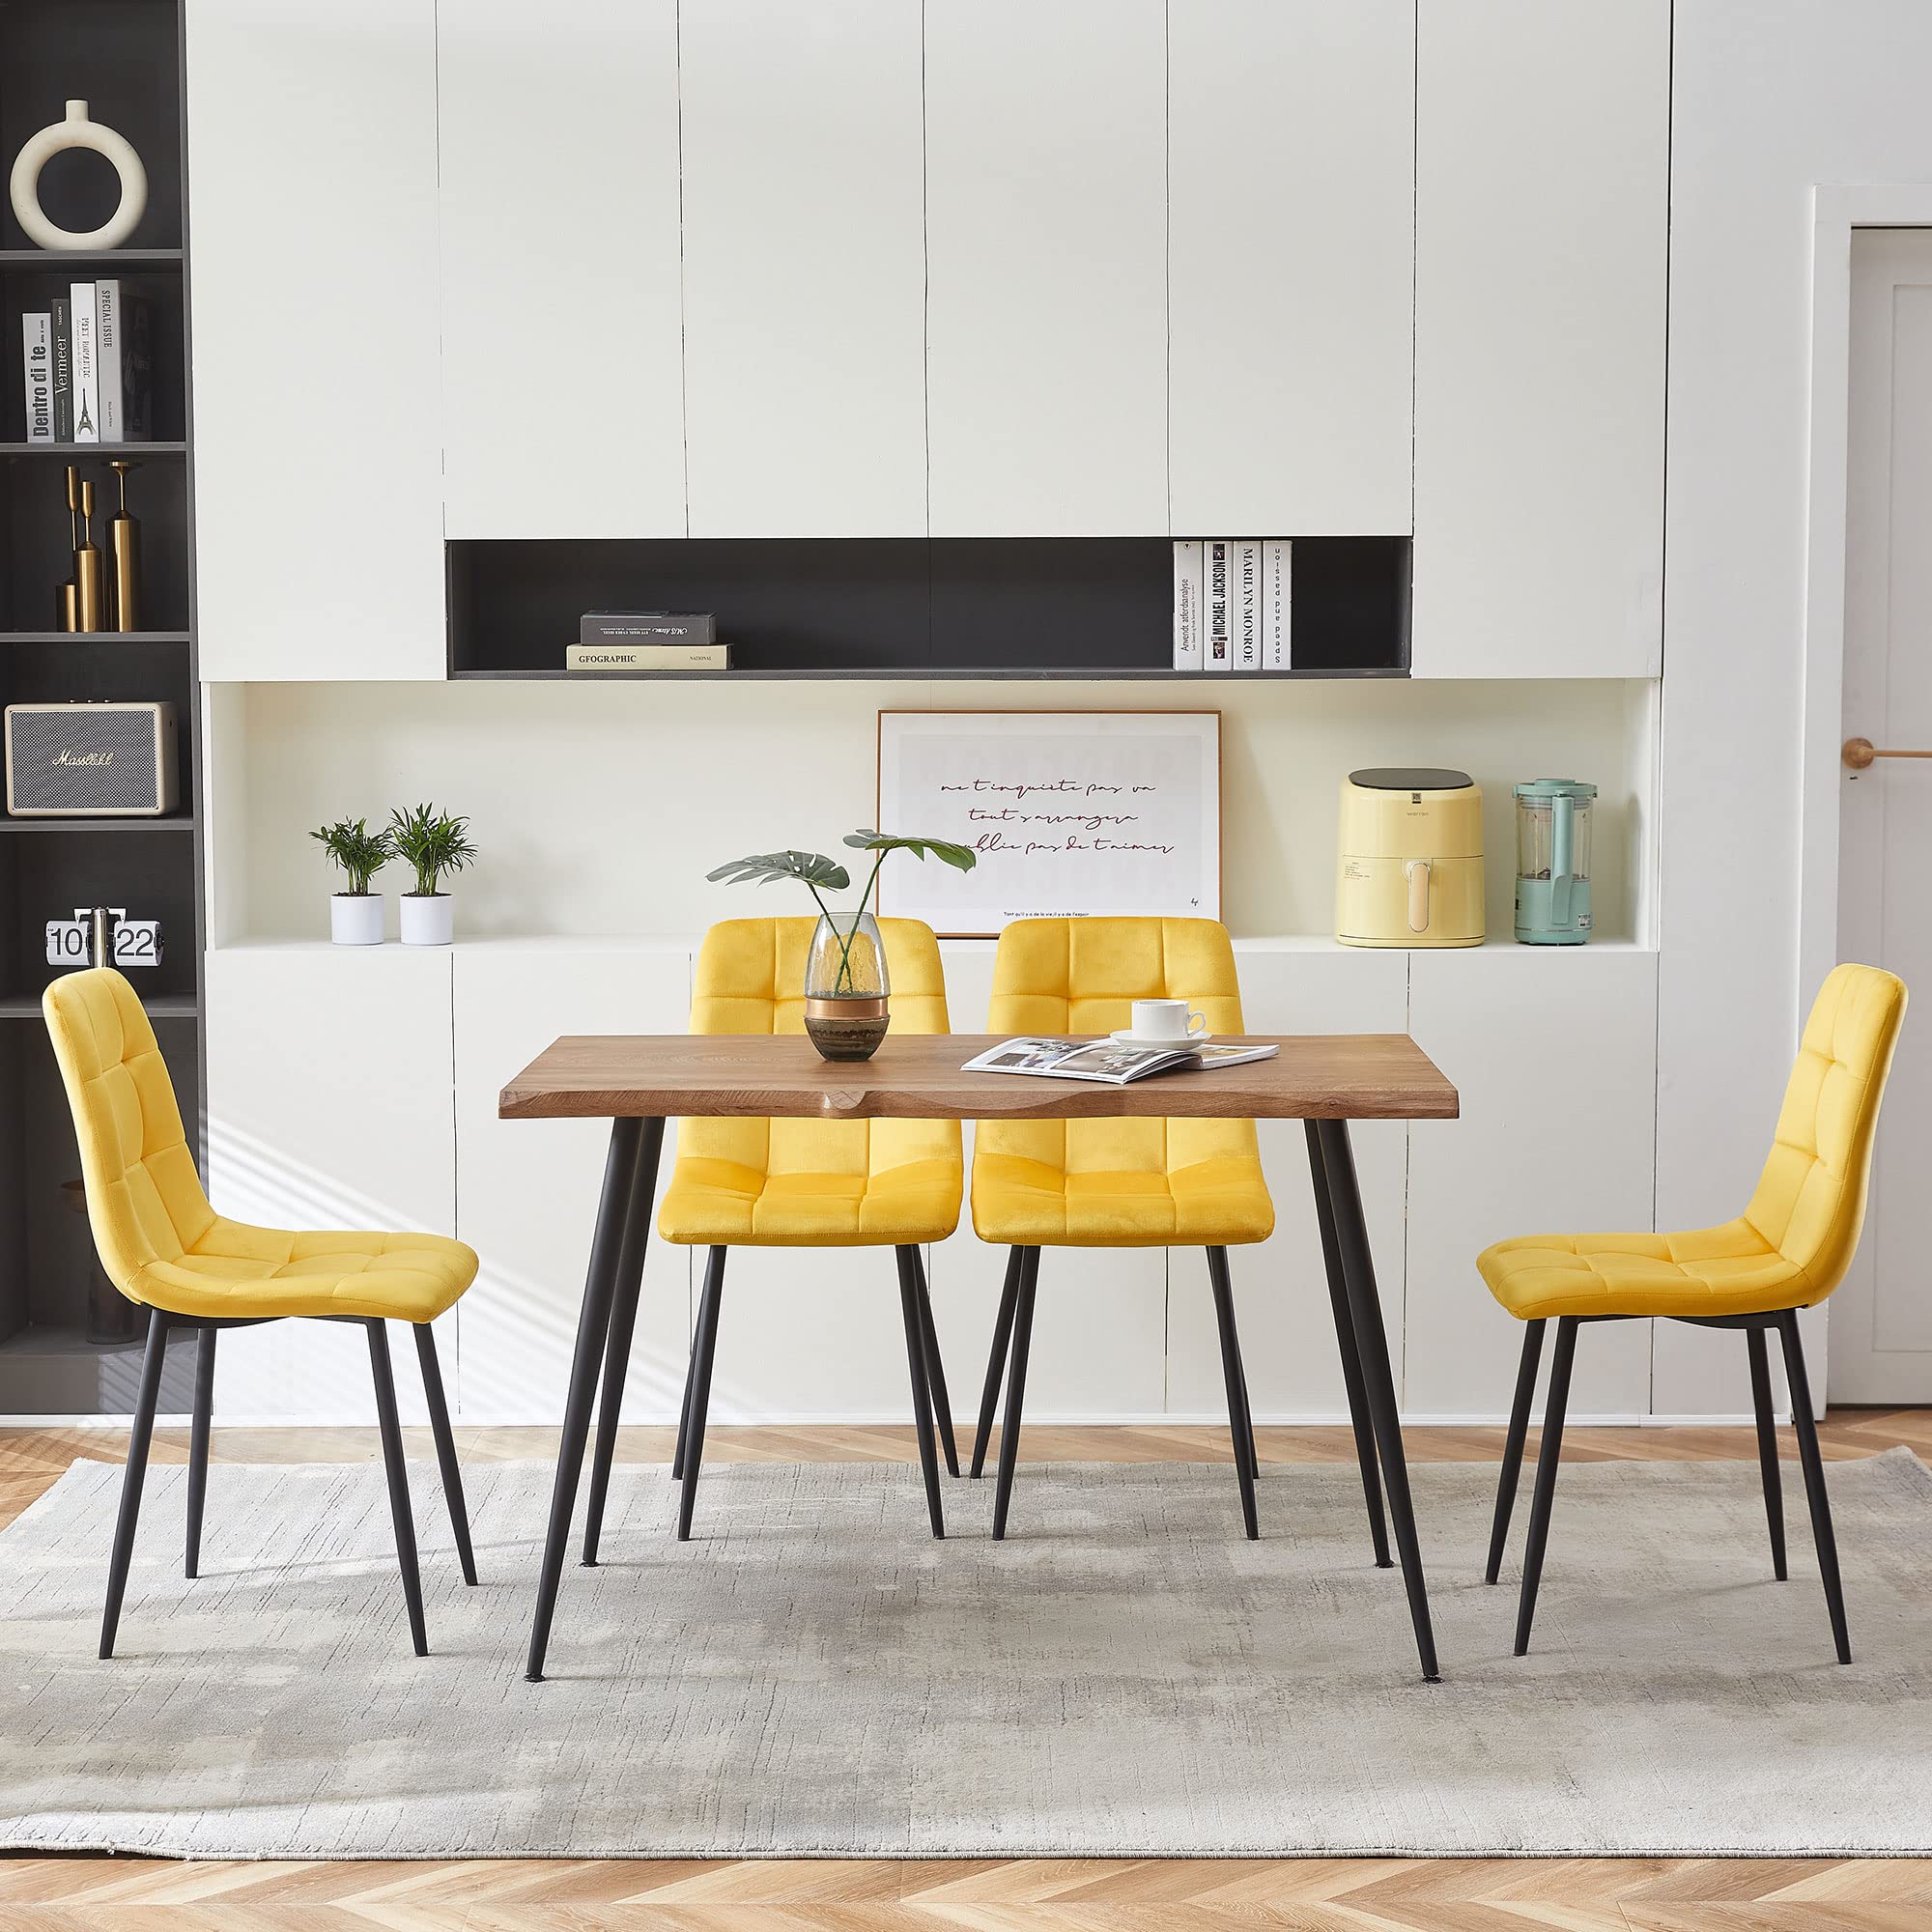 NORDICANA Yellow Velvet Dinner Chairs Set of 4, Modern Armless Biscuit Tufted Dining Side Chairs with Metal Legs for Kitchen Living Room Vanity